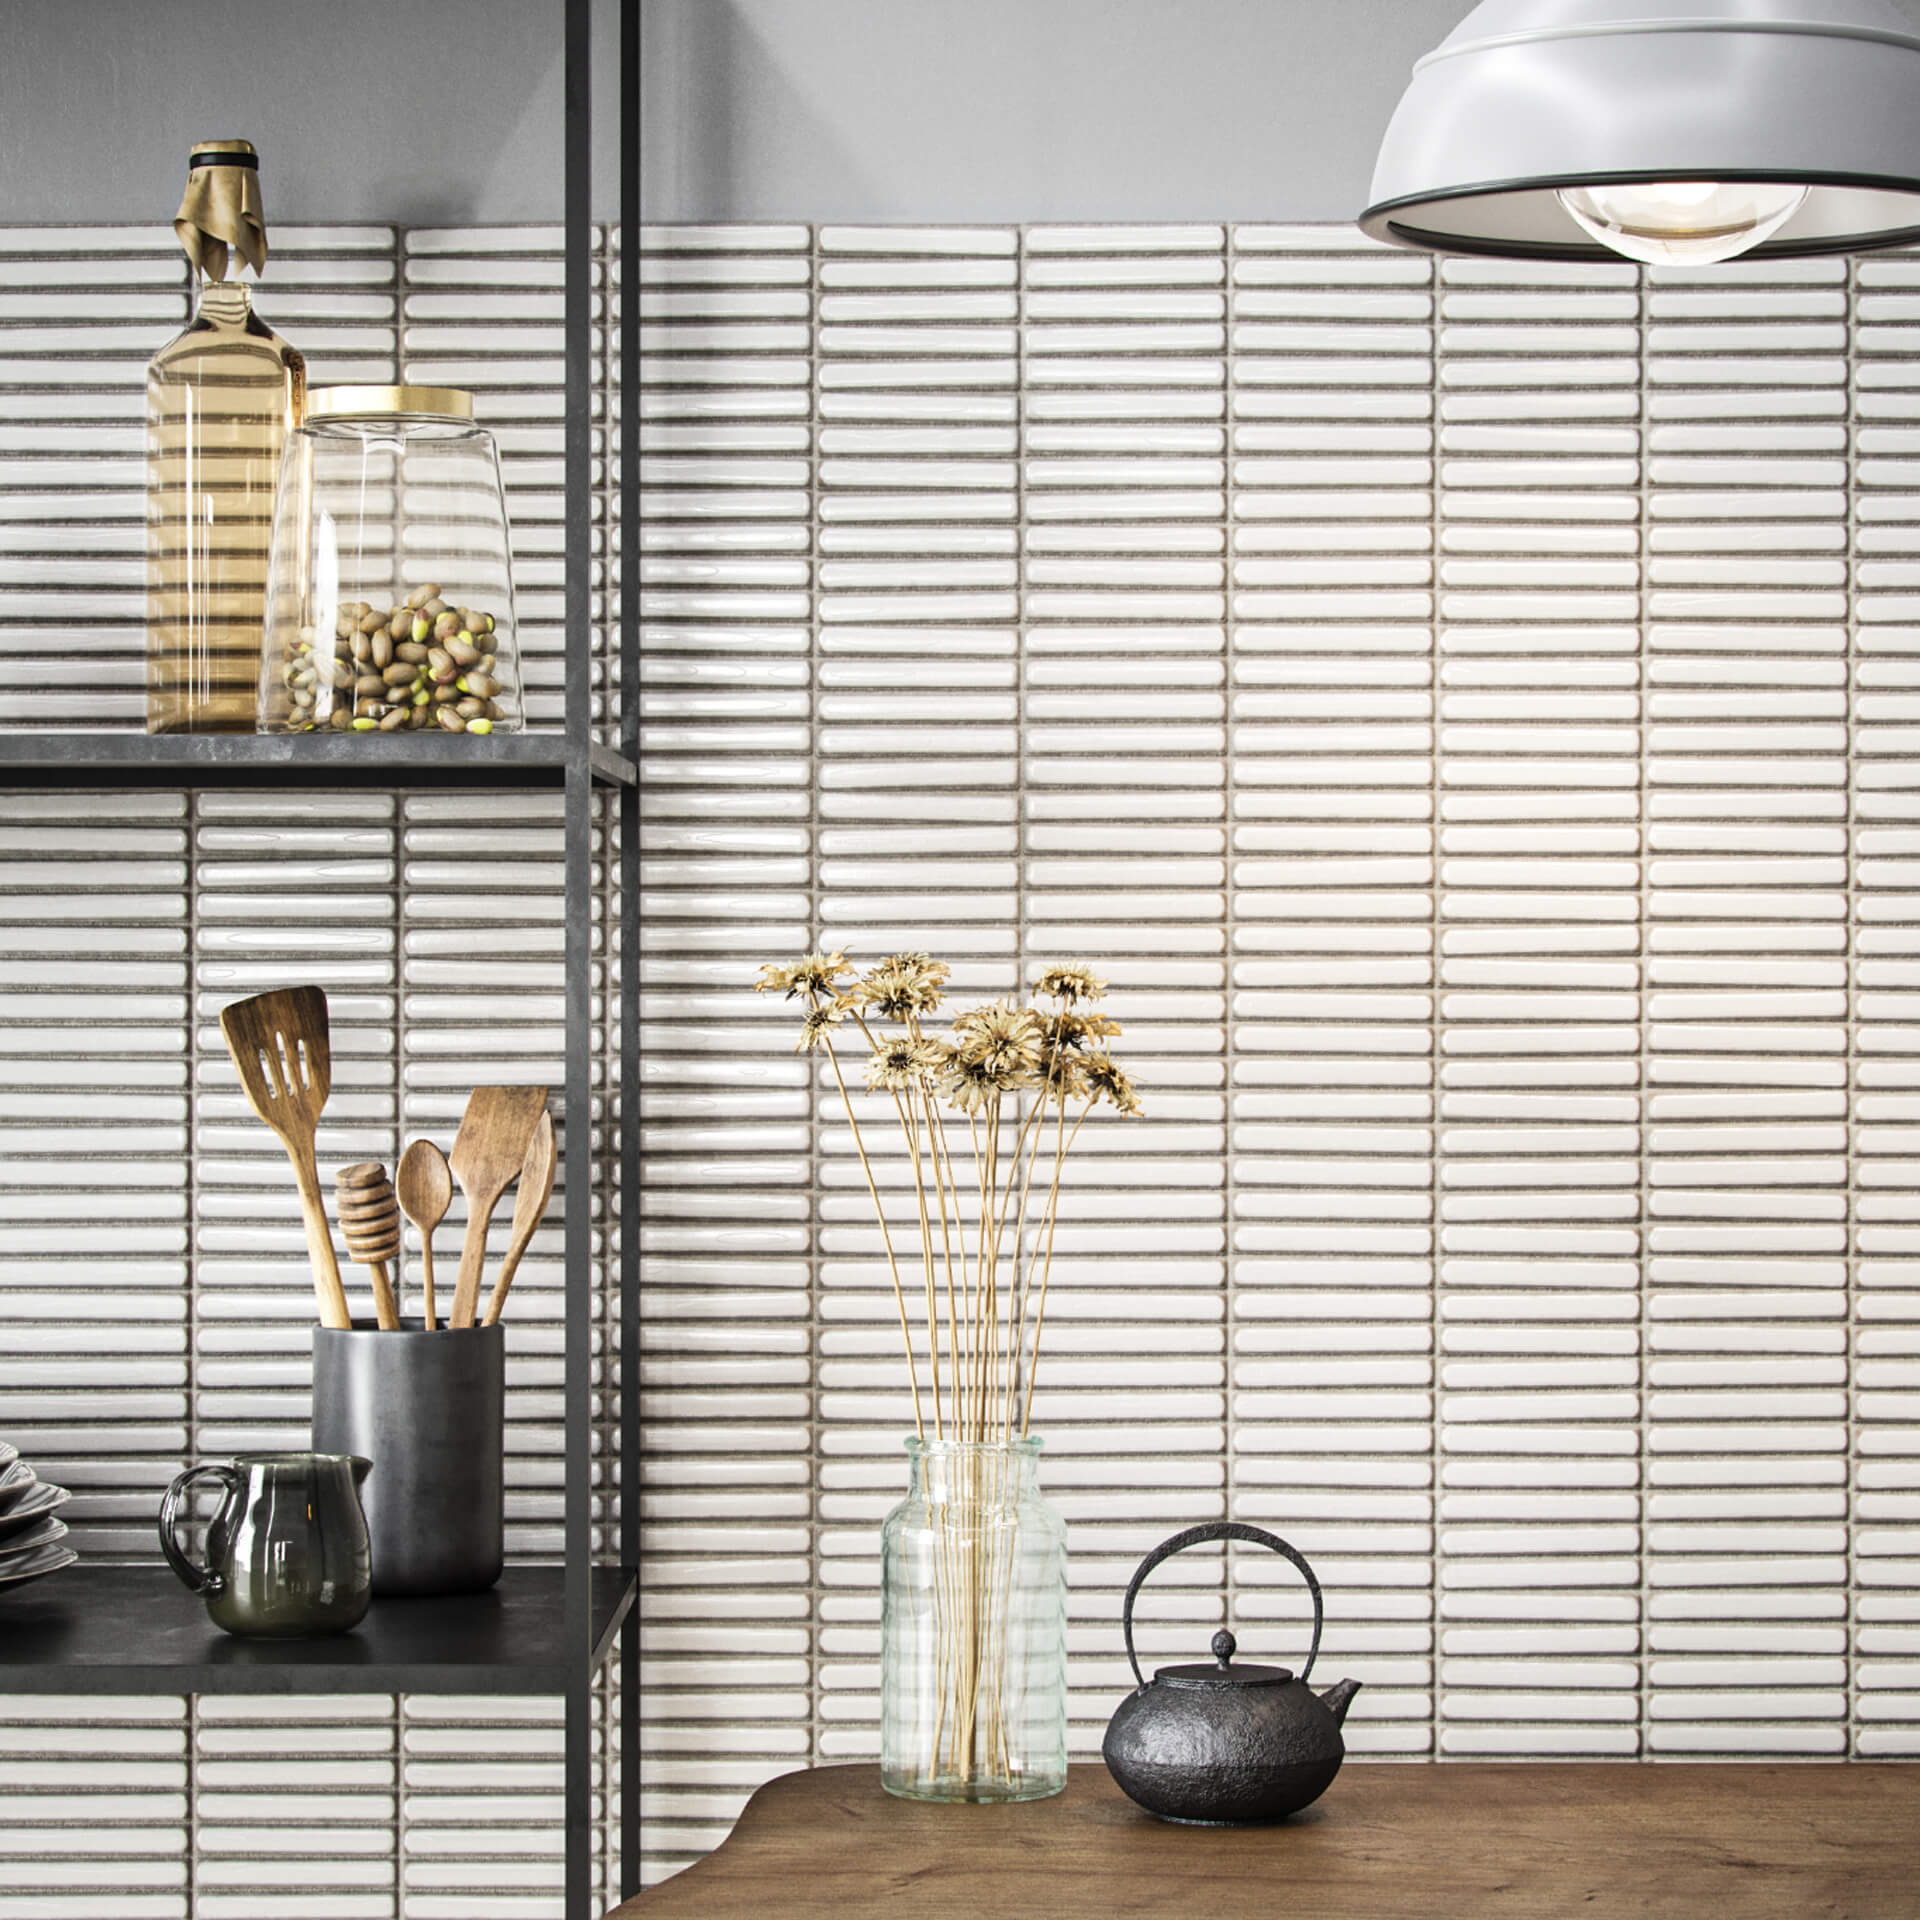 3D Rendering of White Wall Tiles in a Kitchen